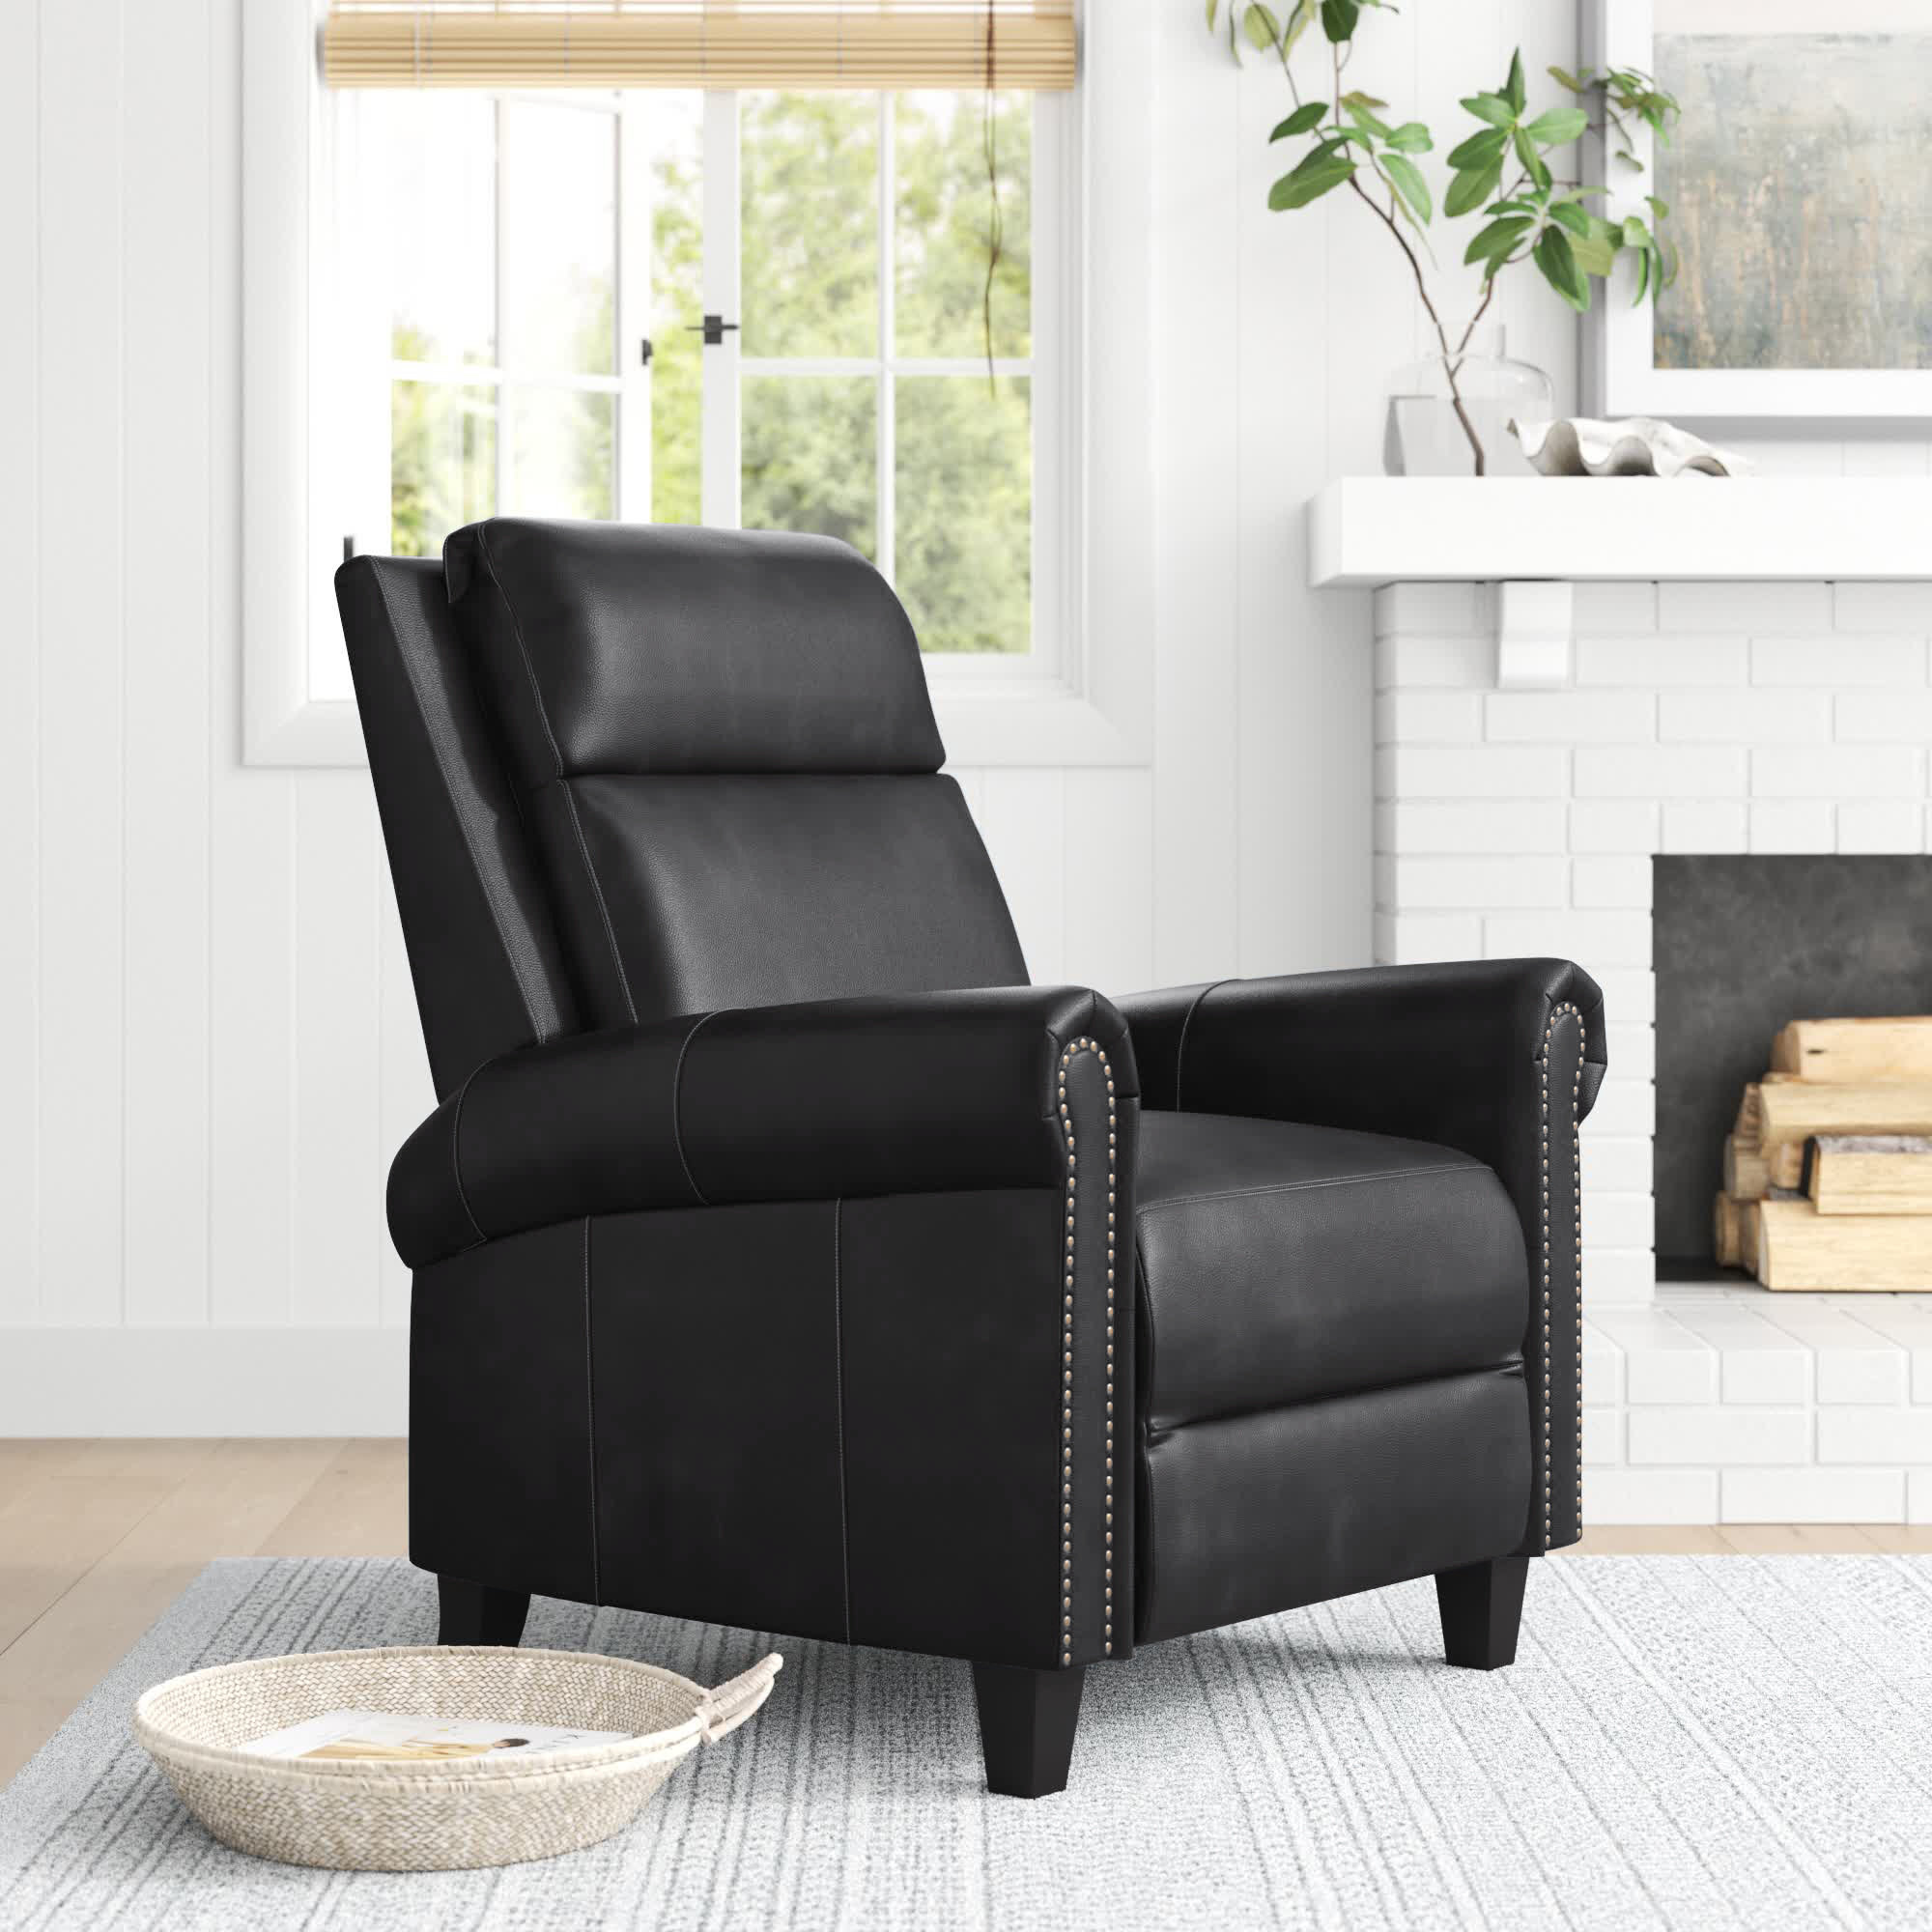 Leather Recliners You'll Love - Wayfair Canada